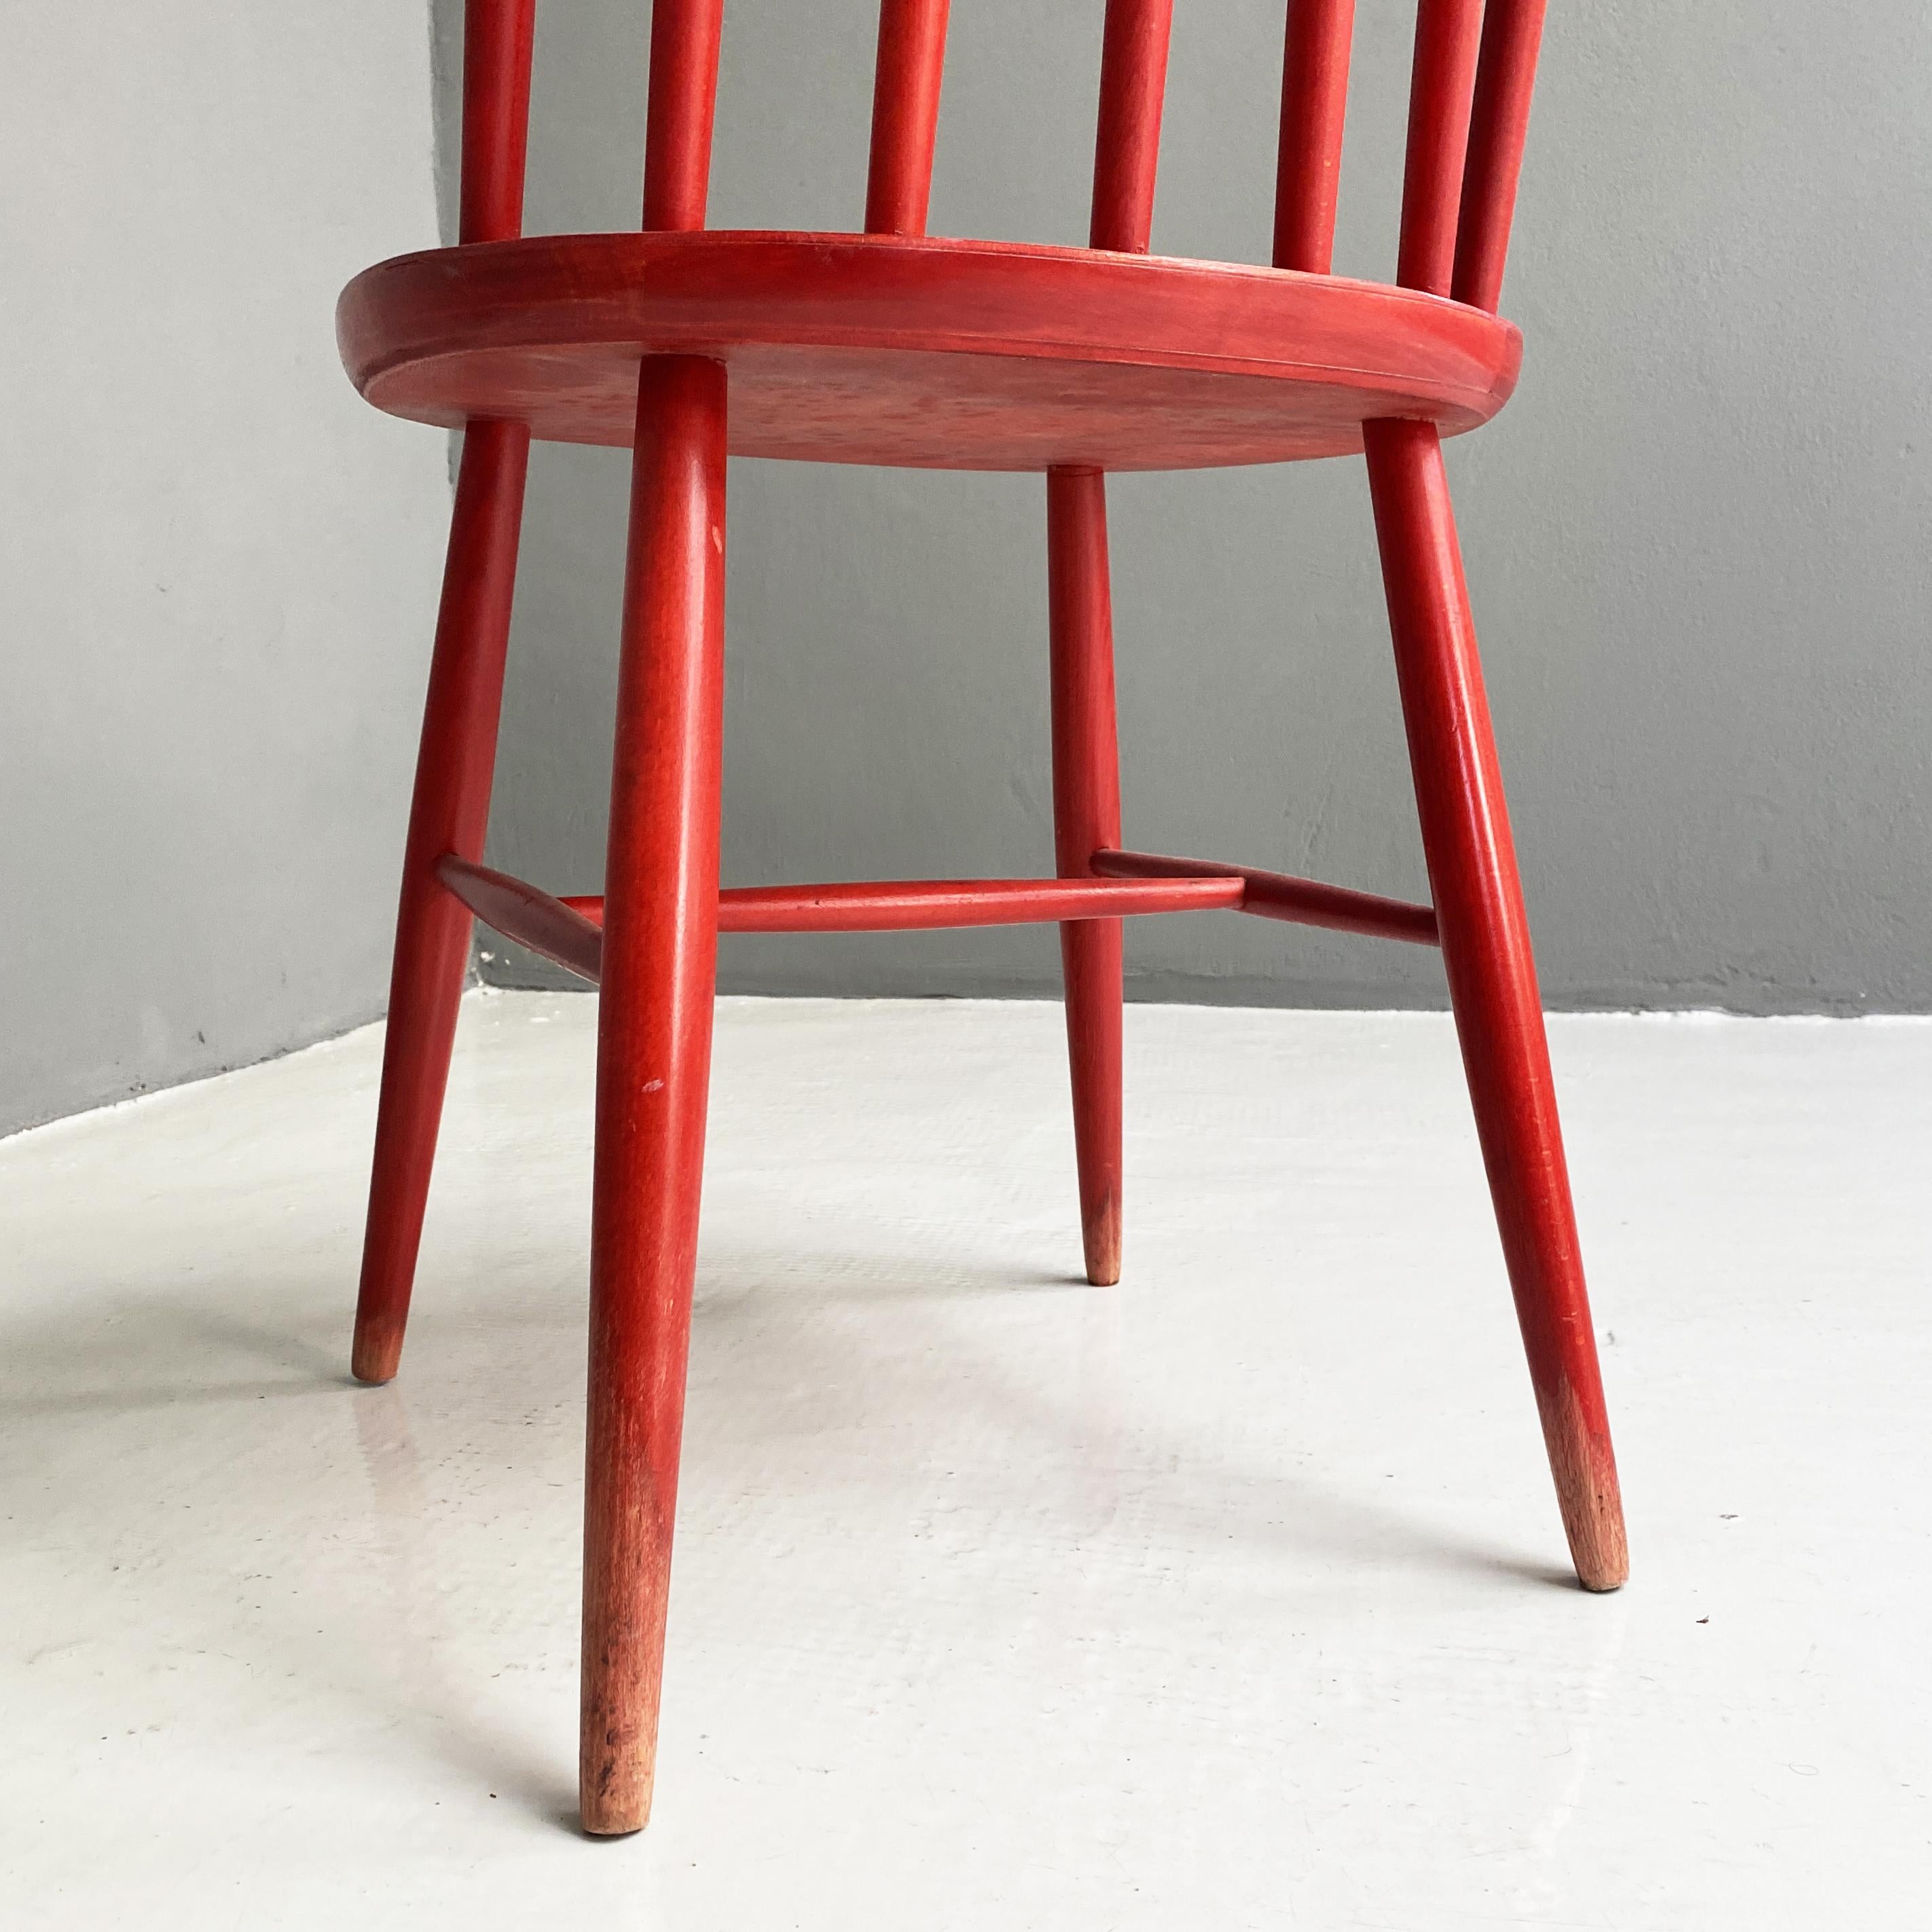 Mid-20th Century Mid-Century Modern Northern Europe Red Wooden Chair, 1960s For Sale